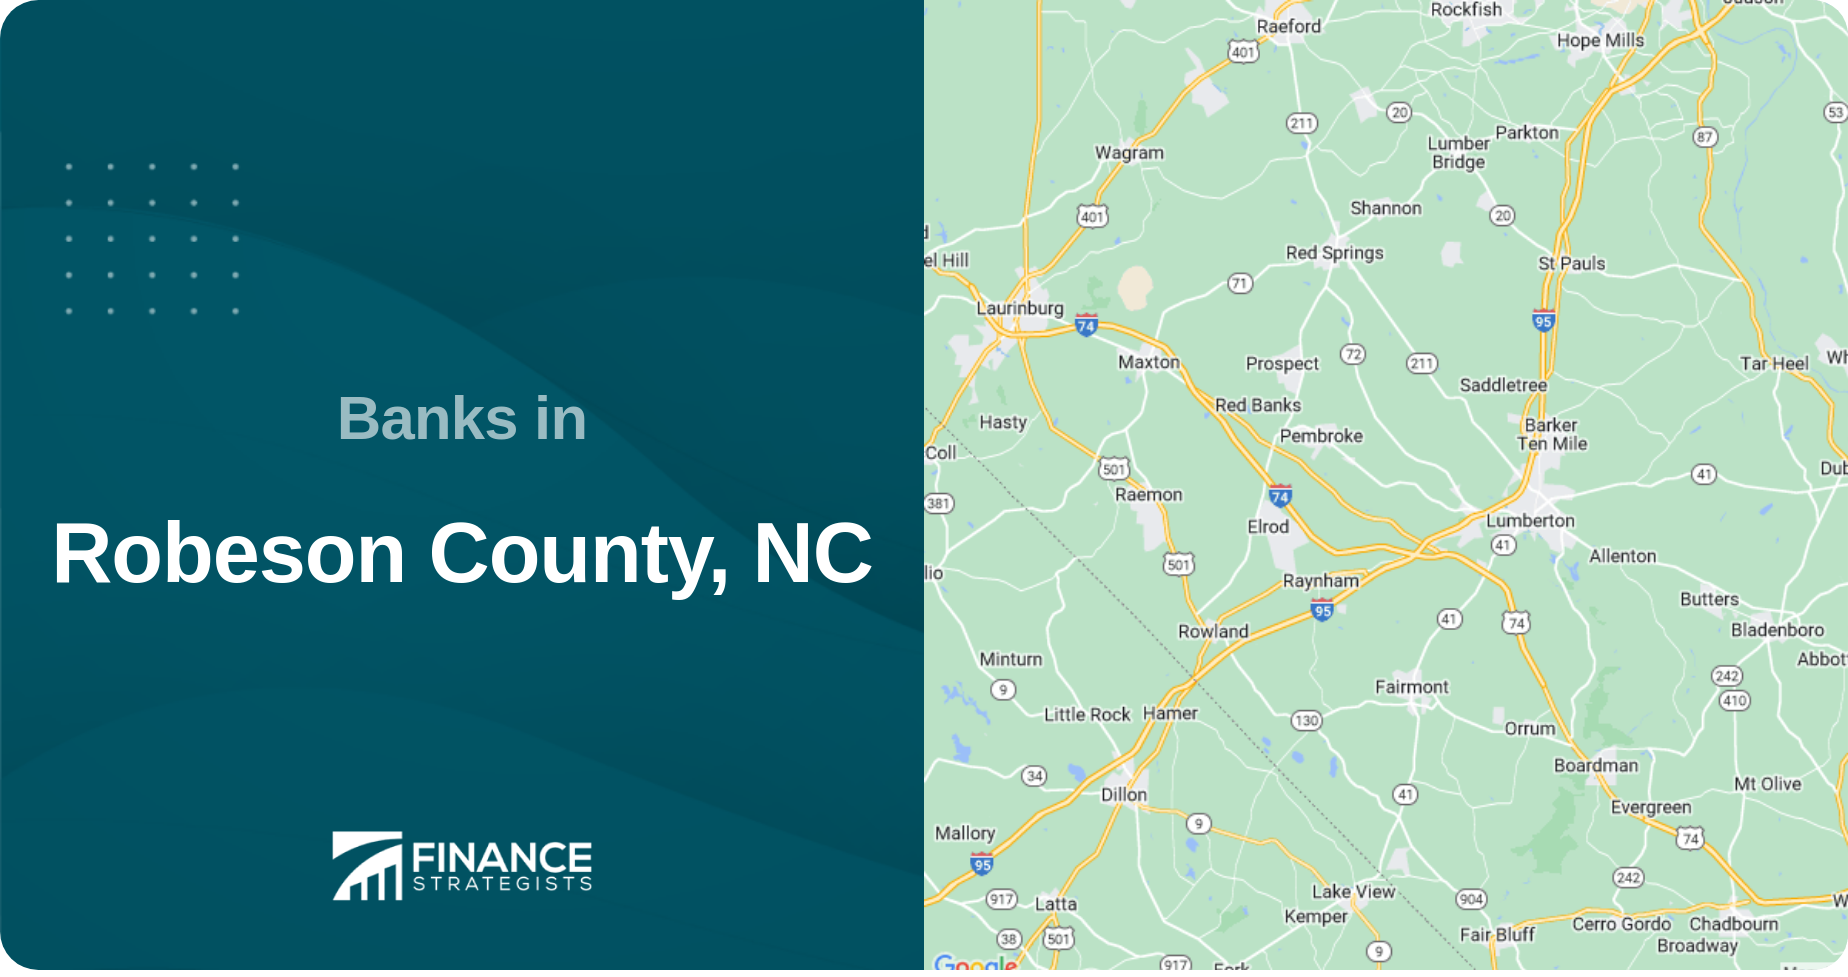 Banks in Robeson County, NC